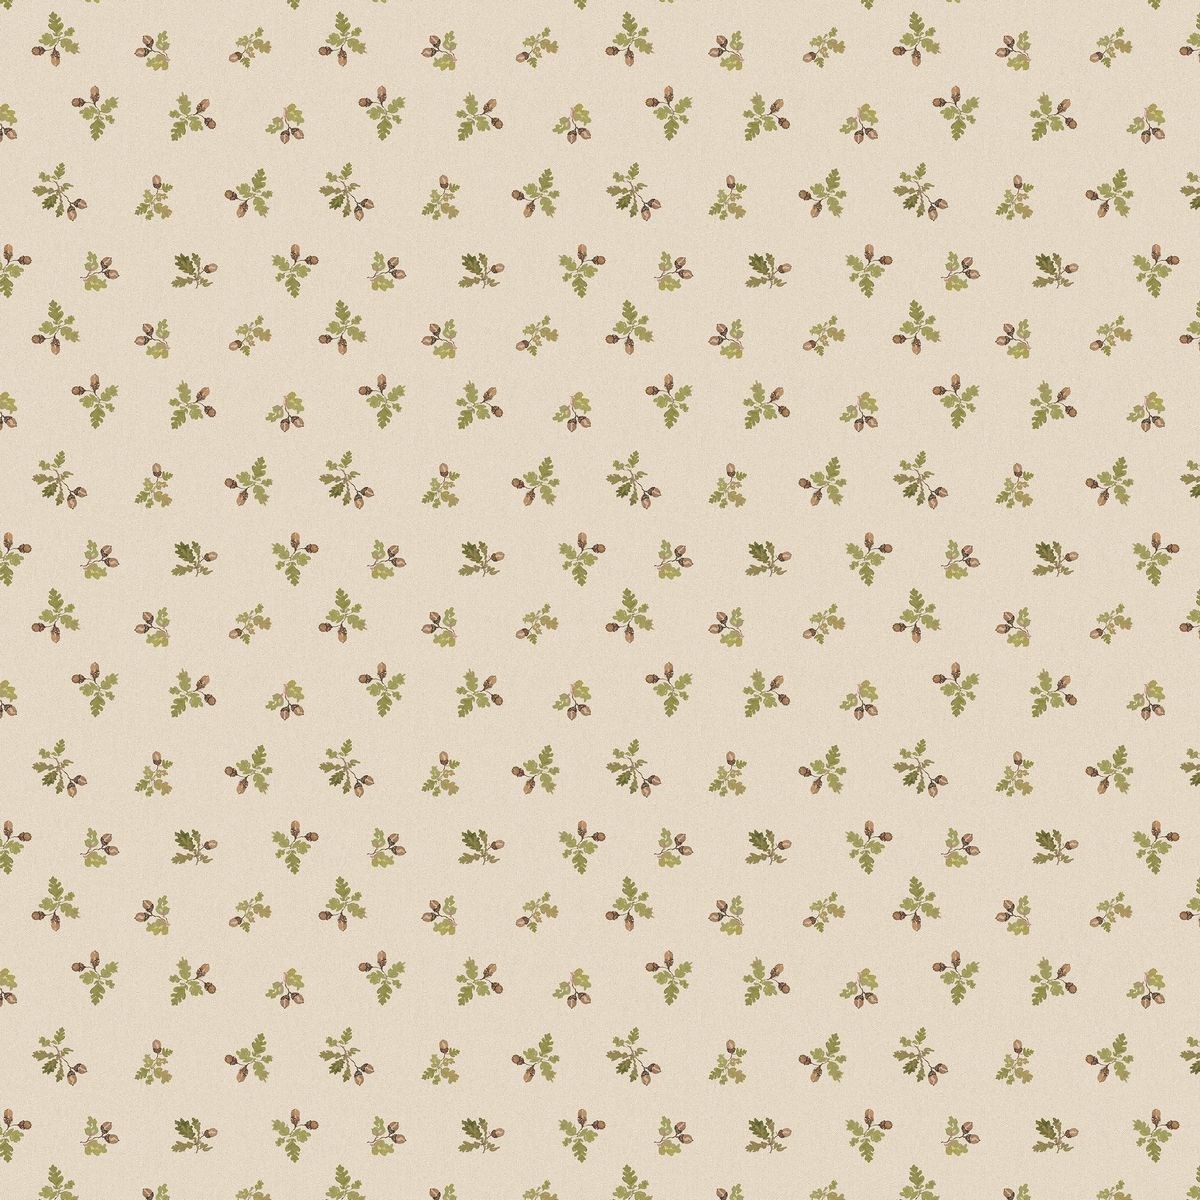 Nutkins Linen Fabric by Voyage Maison